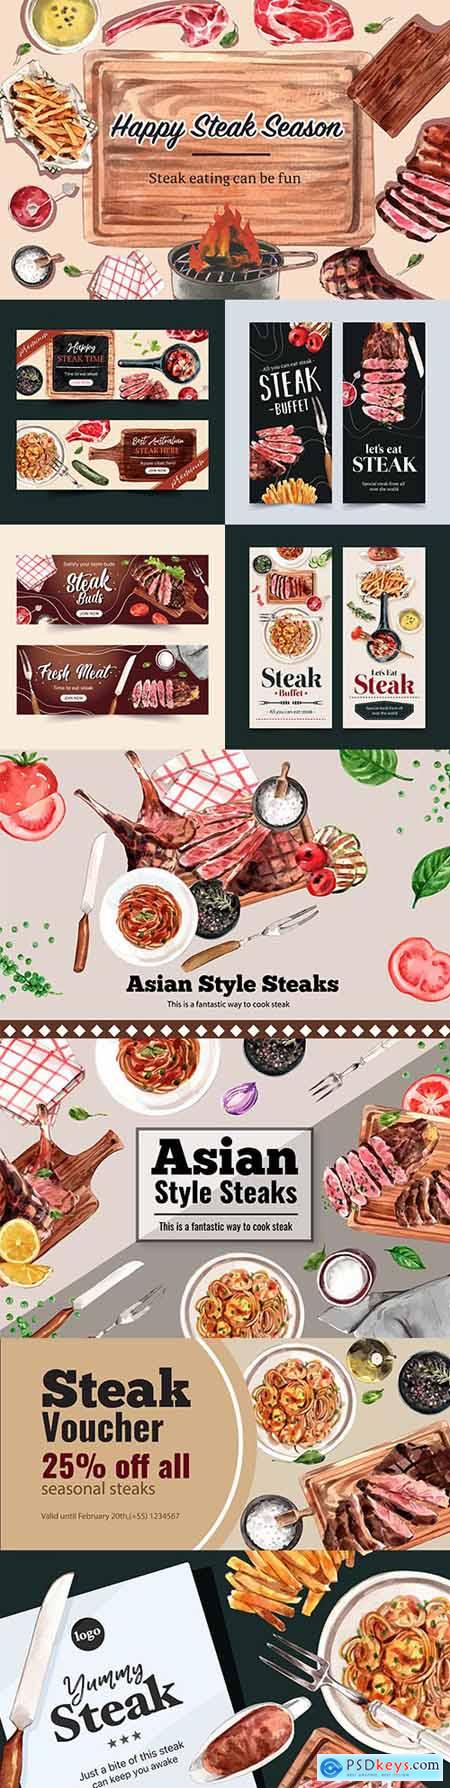 Steak banner design with fried meat, spaghetti watercolor illustrations